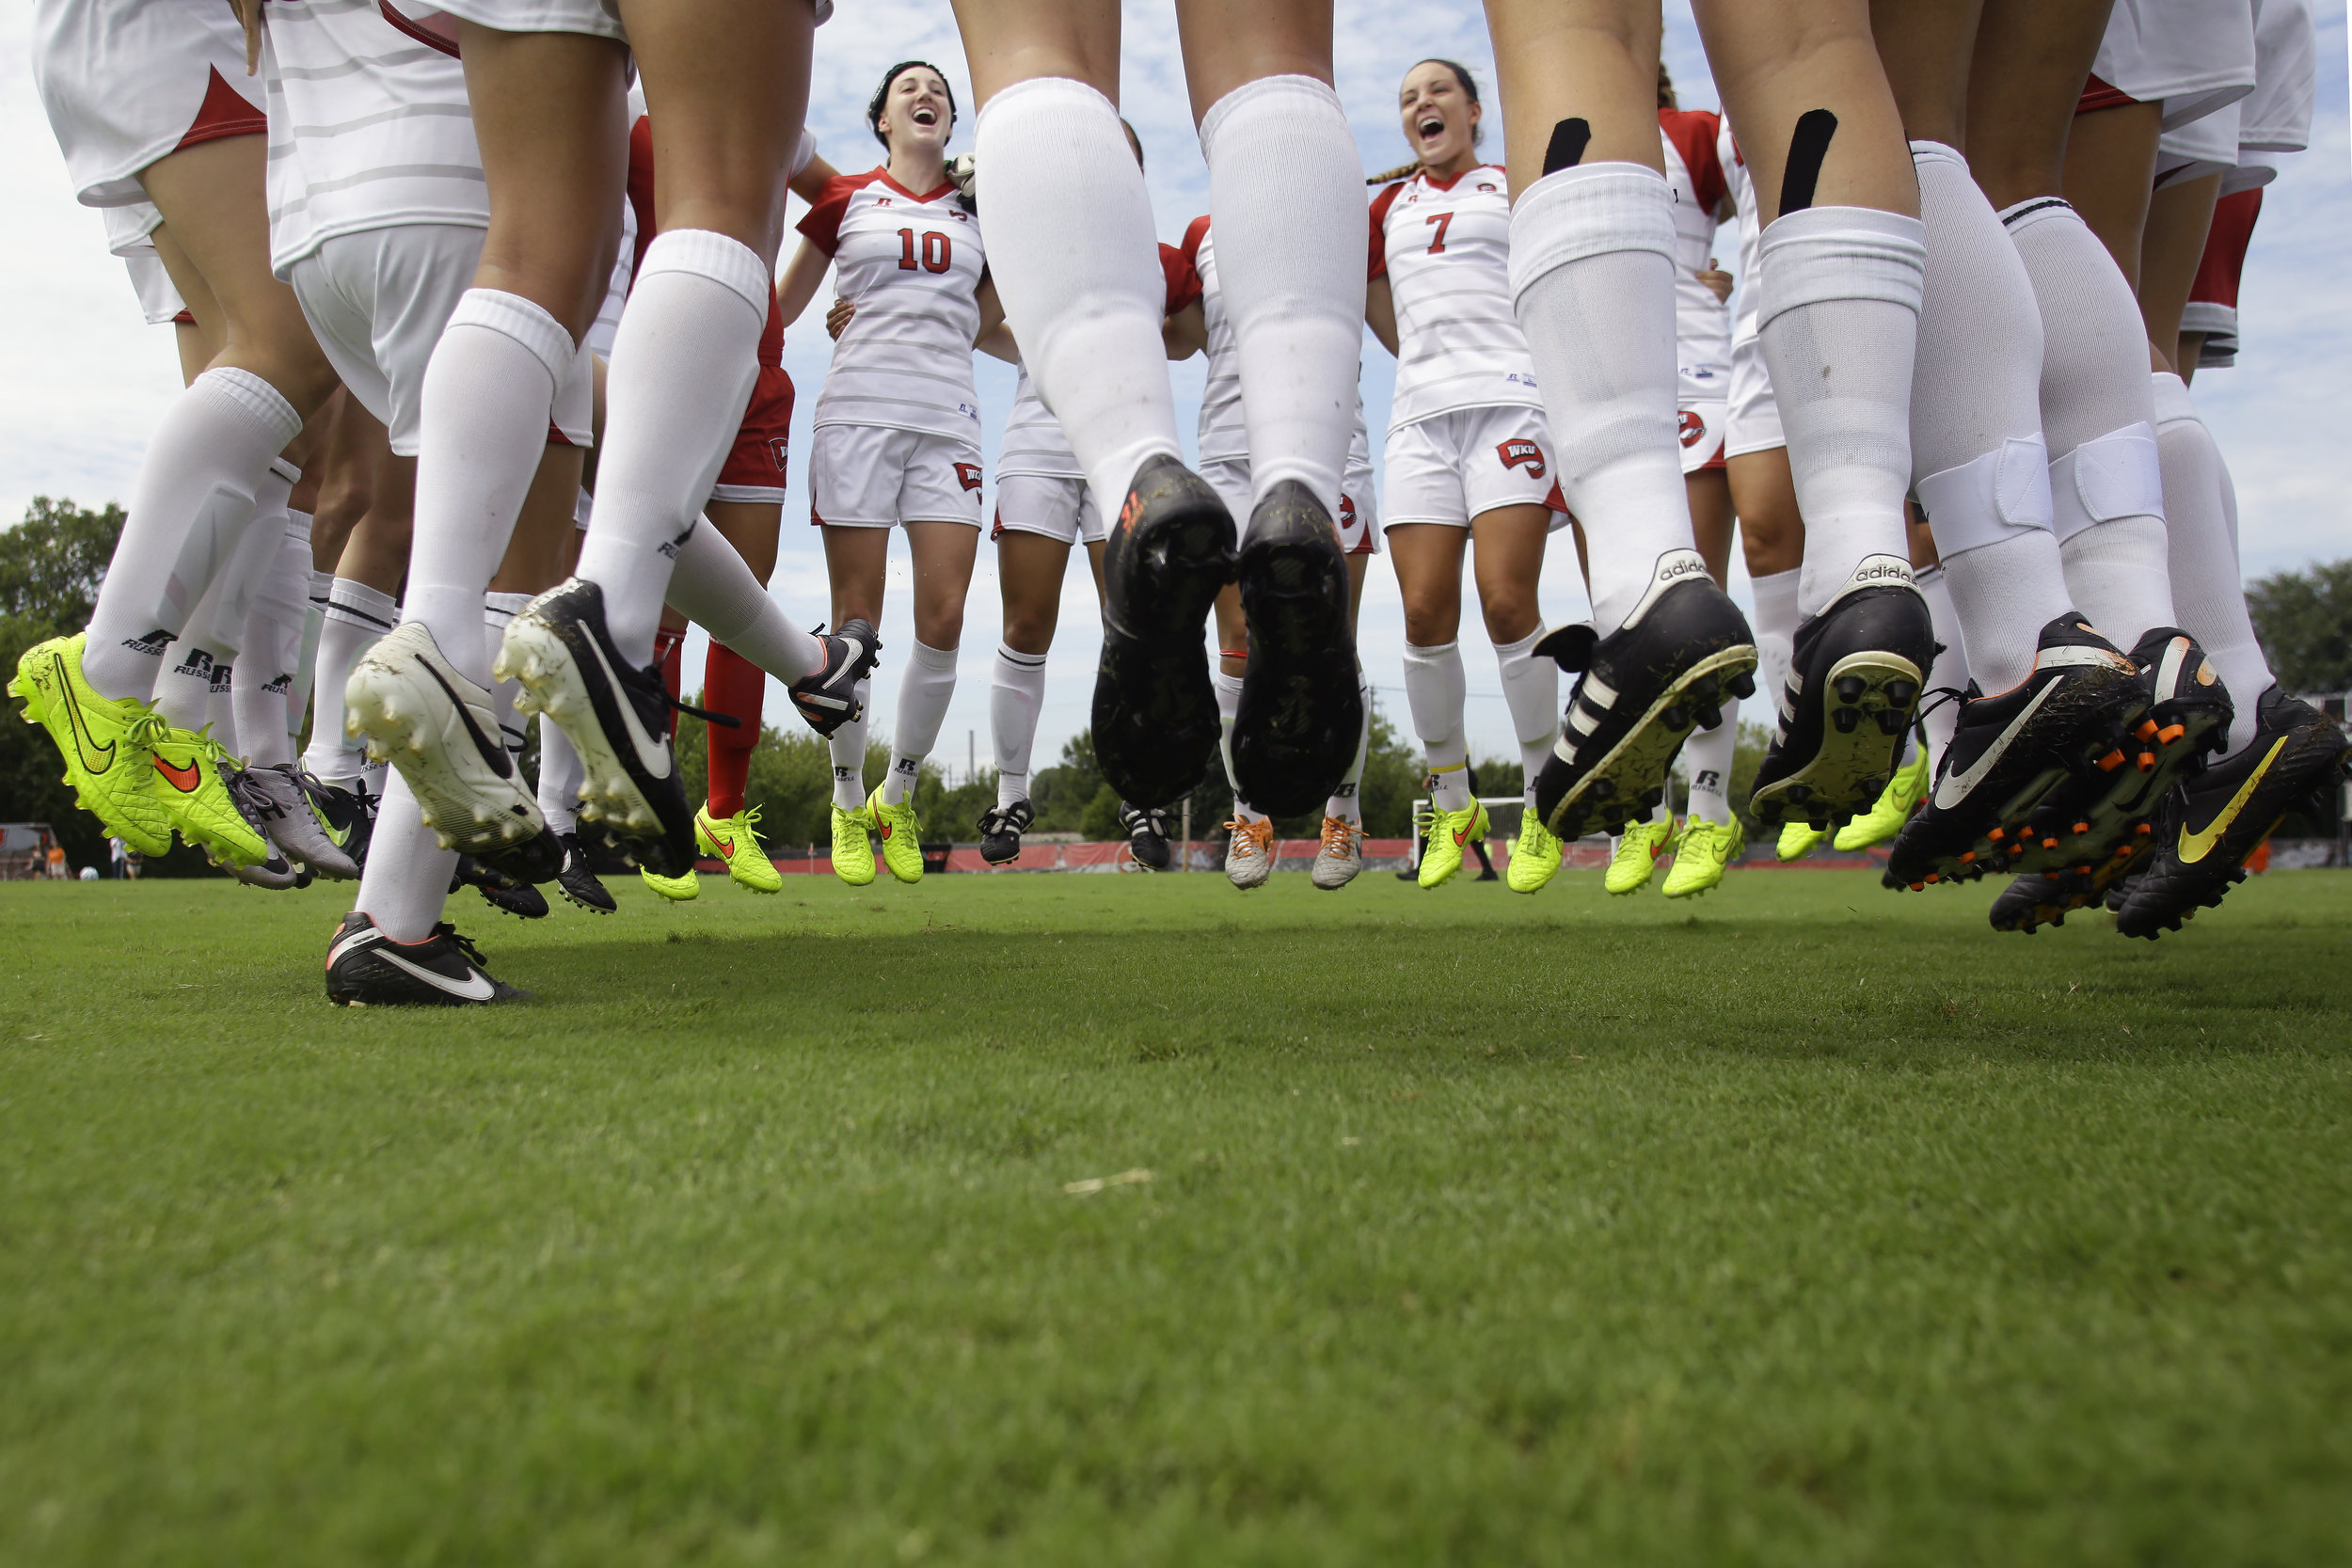  WKU freshman midfielder Sarah Gorham (10) and freshman goalkeeper Allison Leone (1) get pumped up with the rest of the WKU women's soccer team August 24, 2014 prior to their first home matchup against Mercer at the WKU Soccer Complex in Bowling Gree